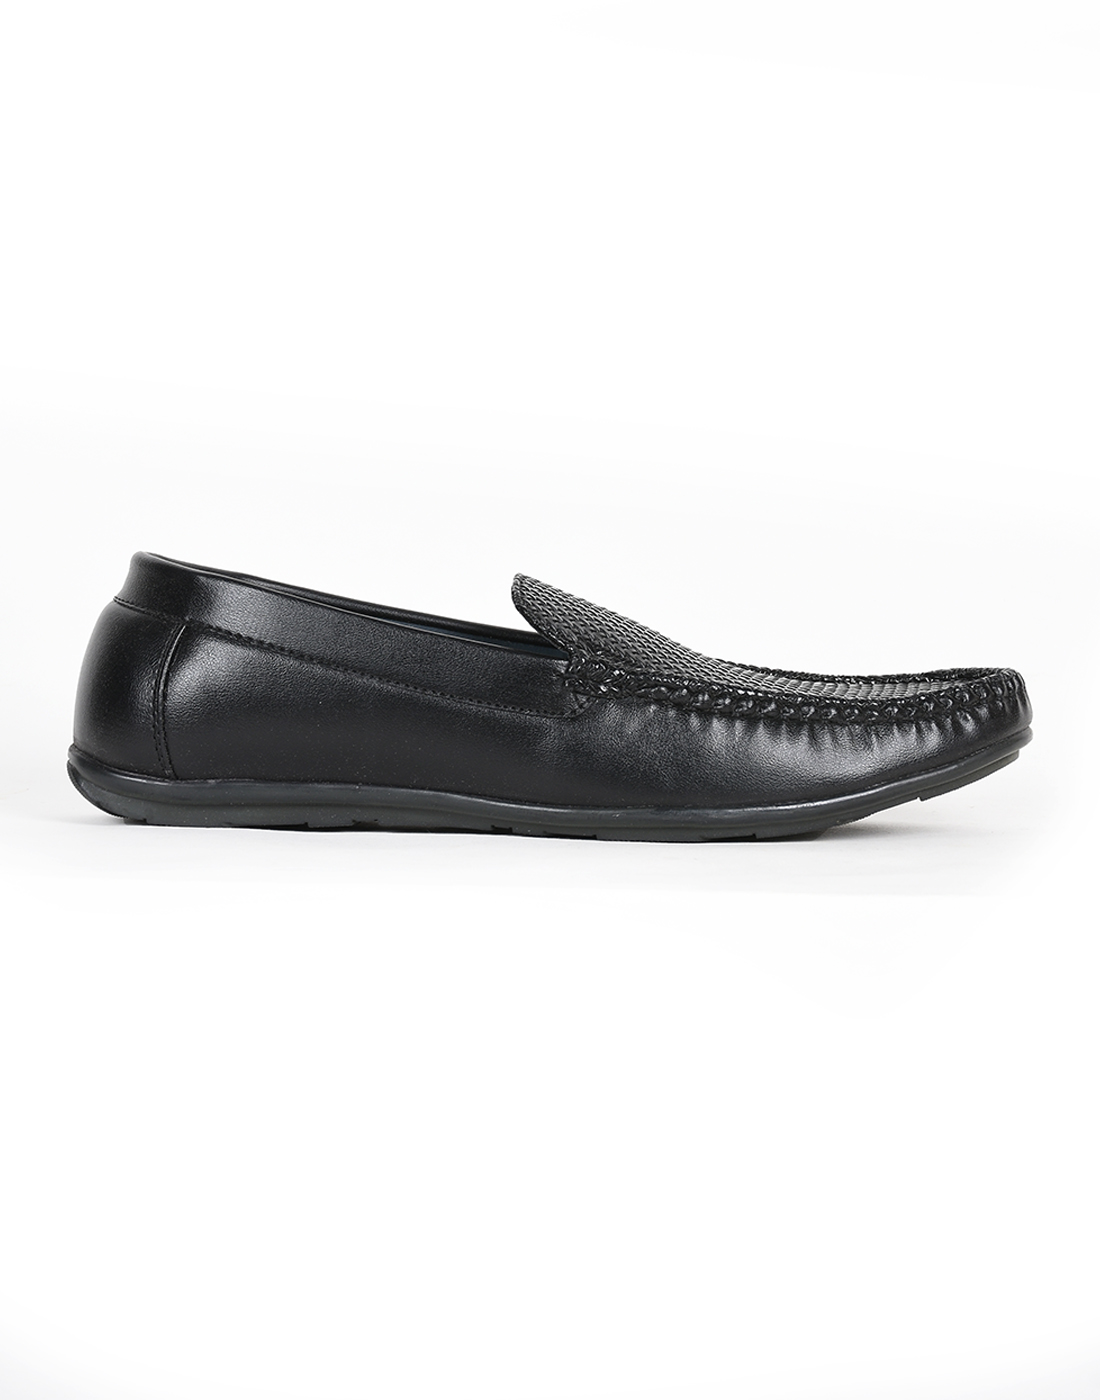 PARAGON Mens Textured Black Moccasins | Slip On Casual Wear Moccasin Shoes for Men